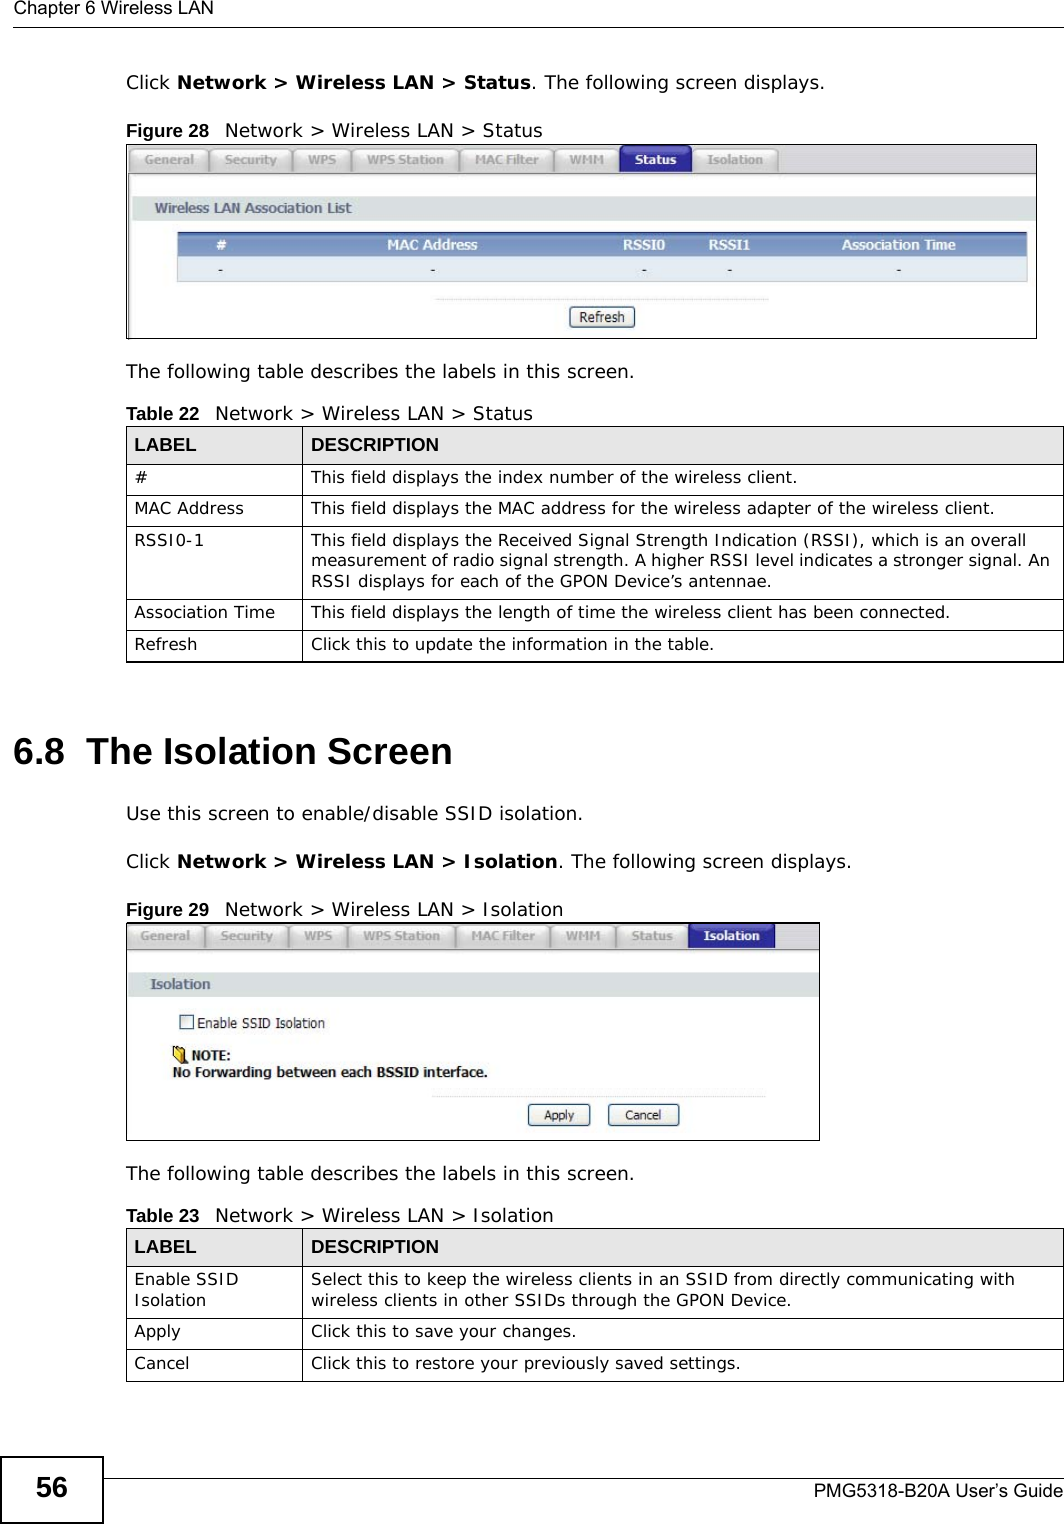 Chapter 6 Wireless LANPMG5318-B20A User’s Guide56Click Network &gt; Wireless LAN &gt; Status. The following screen displays.Figure 28   Network &gt; Wireless LAN &gt; Status The following table describes the labels in this screen.6.8  The Isolation ScreenUse this screen to enable/disable SSID isolation.Click Network &gt; Wireless LAN &gt; Isolation. The following screen displays.Figure 29   Network &gt; Wireless LAN &gt; Isolation The following table describes the labels in this screen.Table 22   Network &gt; Wireless LAN &gt; StatusLABEL DESCRIPTION# This field displays the index number of the wireless client.MAC Address This field displays the MAC address for the wireless adapter of the wireless client.RSSI0-1 This field displays the Received Signal Strength Indication (RSSI), which is an overall measurement of radio signal strength. A higher RSSI level indicates a stronger signal. An RSSI displays for each of the GPON Device’s antennae.Association Time This field displays the length of time the wireless client has been connected.Refresh Click this to update the information in the table.Table 23   Network &gt; Wireless LAN &gt; IsolationLABEL DESCRIPTIONEnable SSID Isolation Select this to keep the wireless clients in an SSID from directly communicating with wireless clients in other SSIDs through the GPON Device.Apply Click this to save your changes.Cancel Click this to restore your previously saved settings.